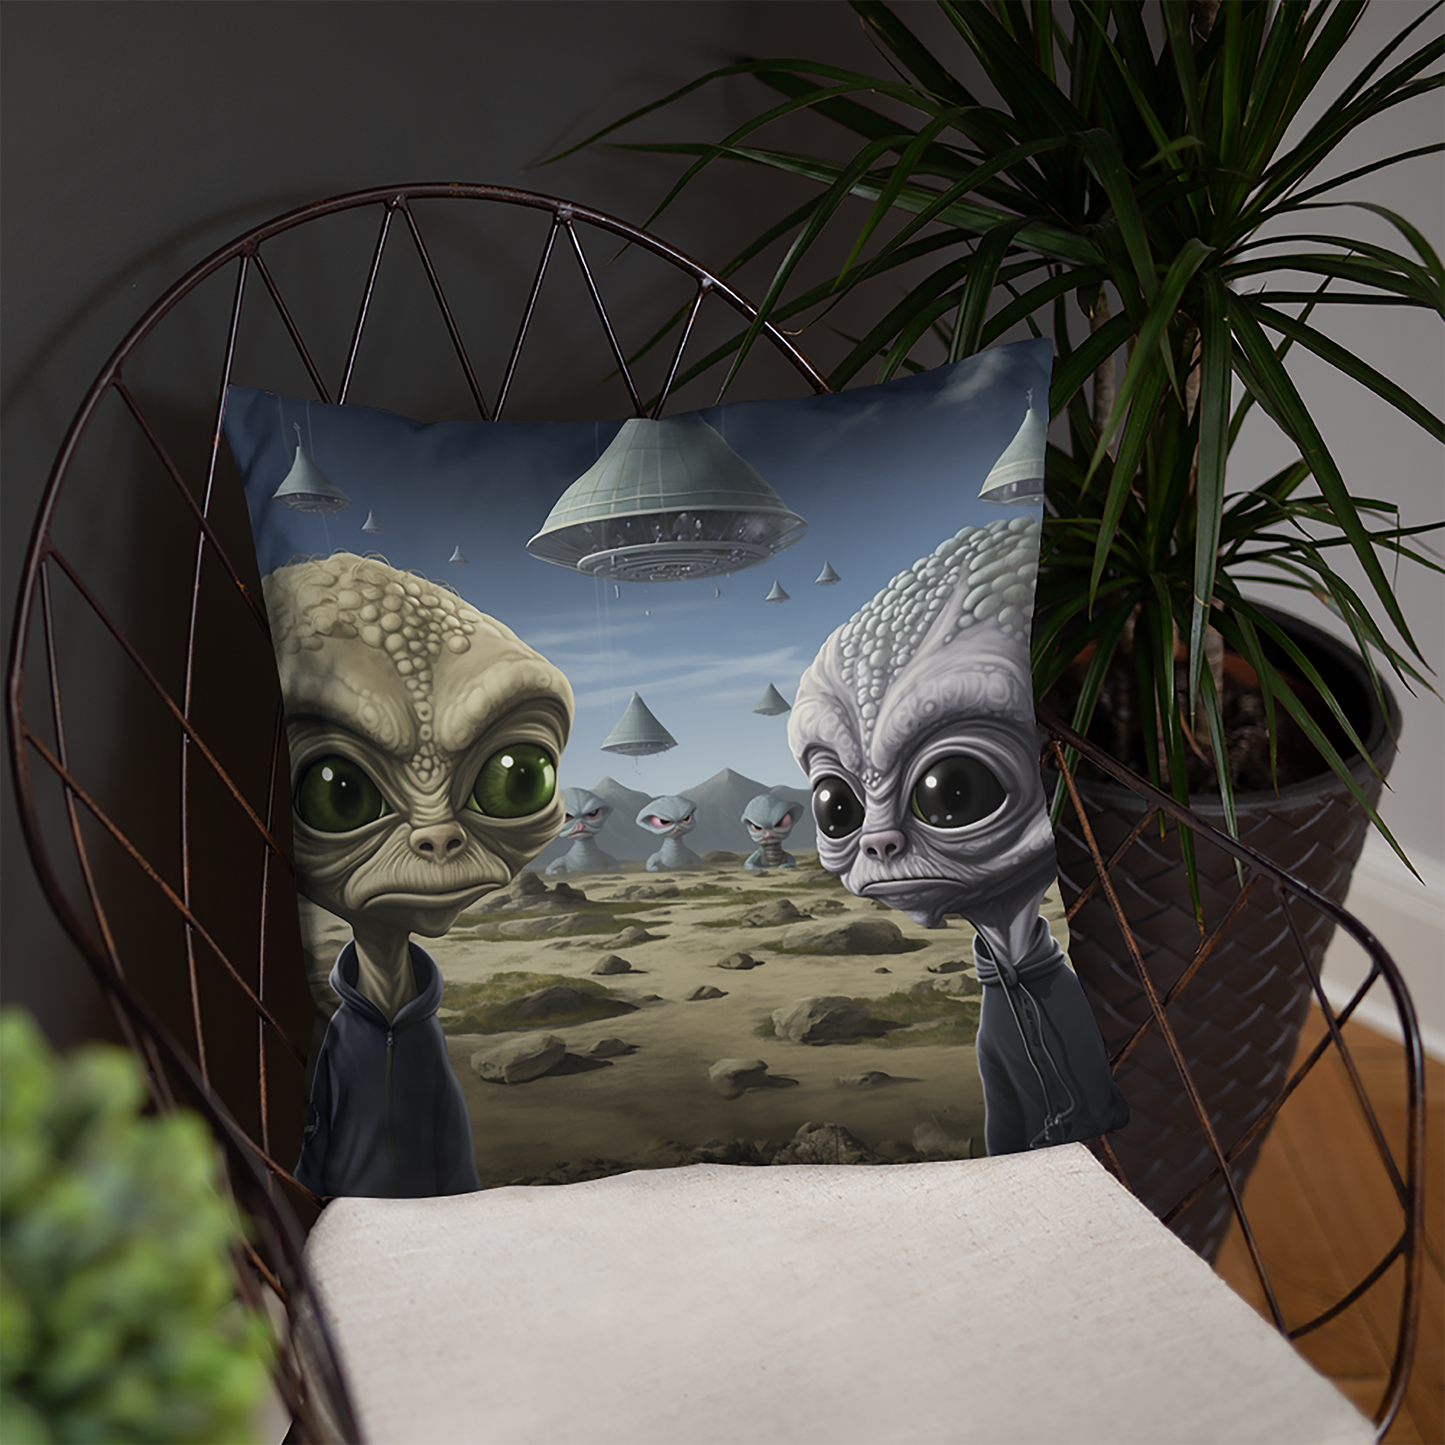 Space Throw Pillow Hoodie-Wearing Aliens Polyester Decorative Cushion 18x18